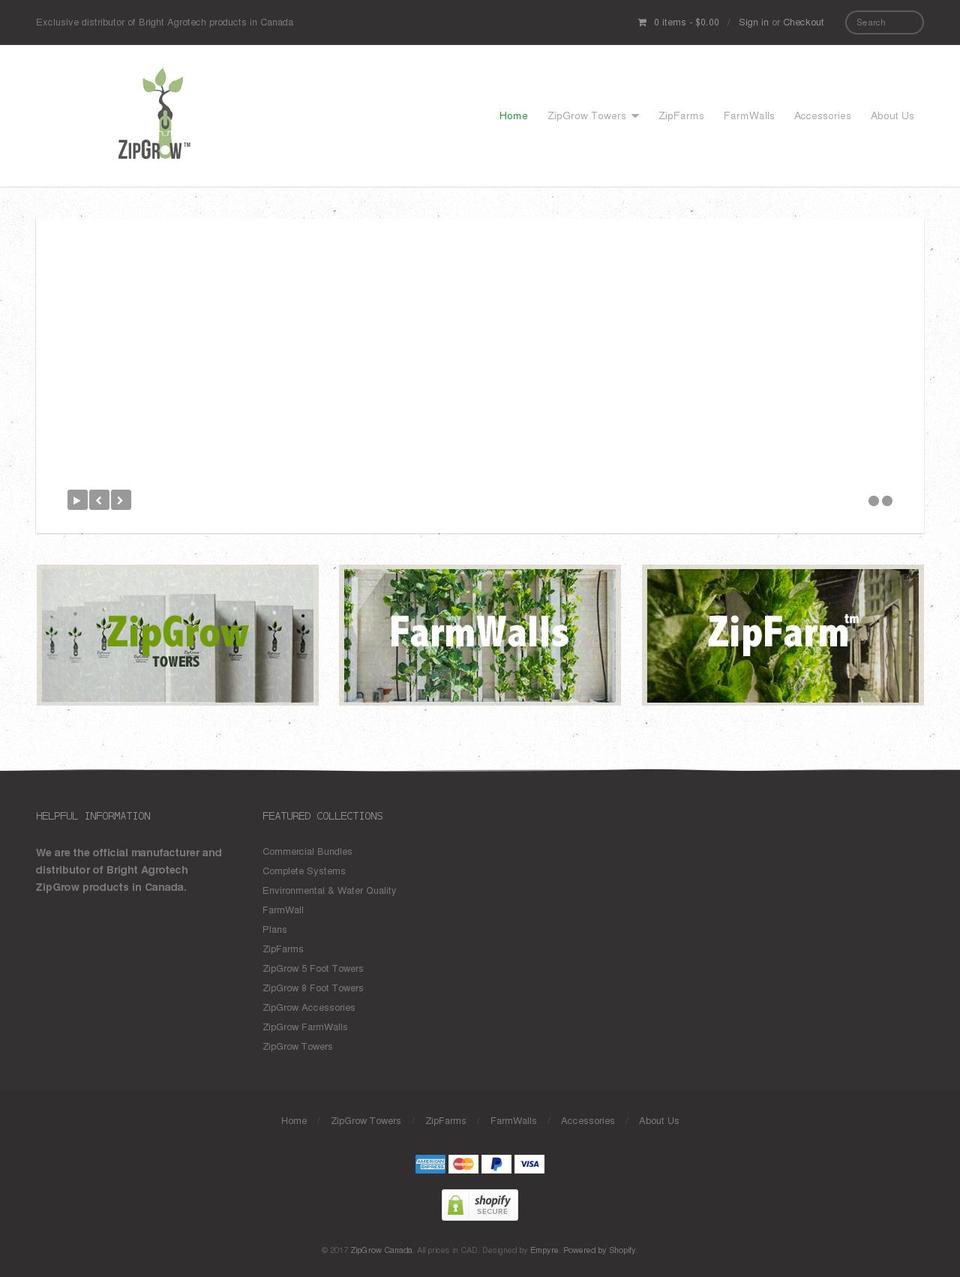 Providence Shopify theme site example zipgrow.ca